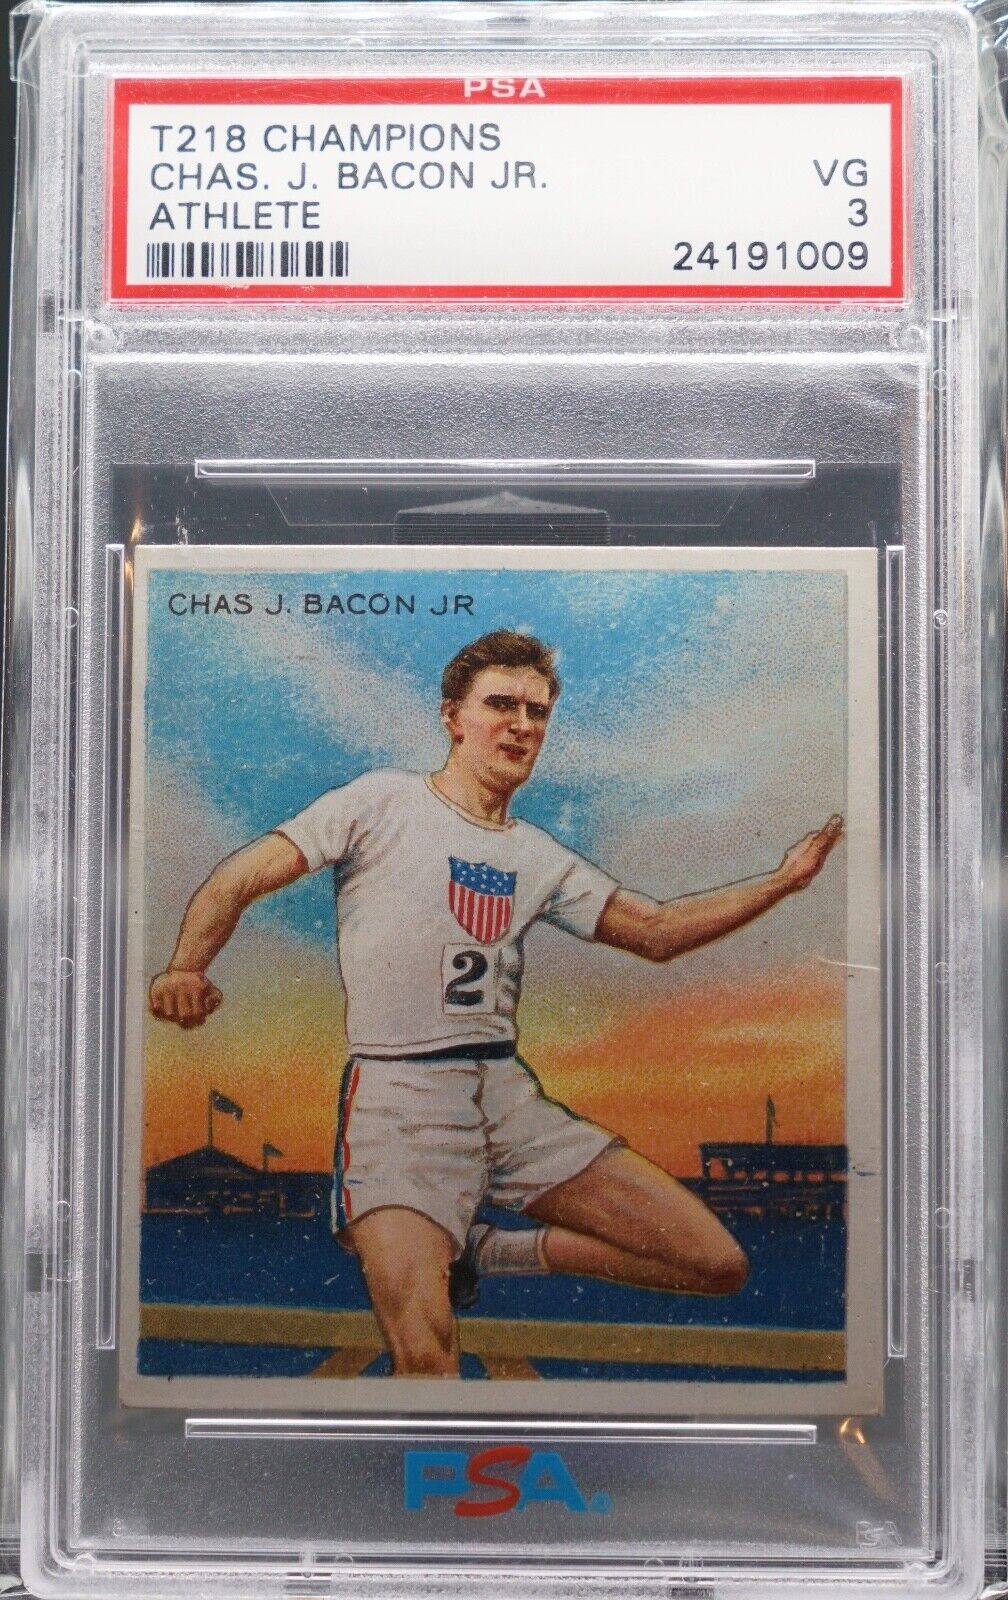 1910 Mecca T218 Hassan Tobacco Card, Champions, Chas J. Bacon, Runner, PSA 3